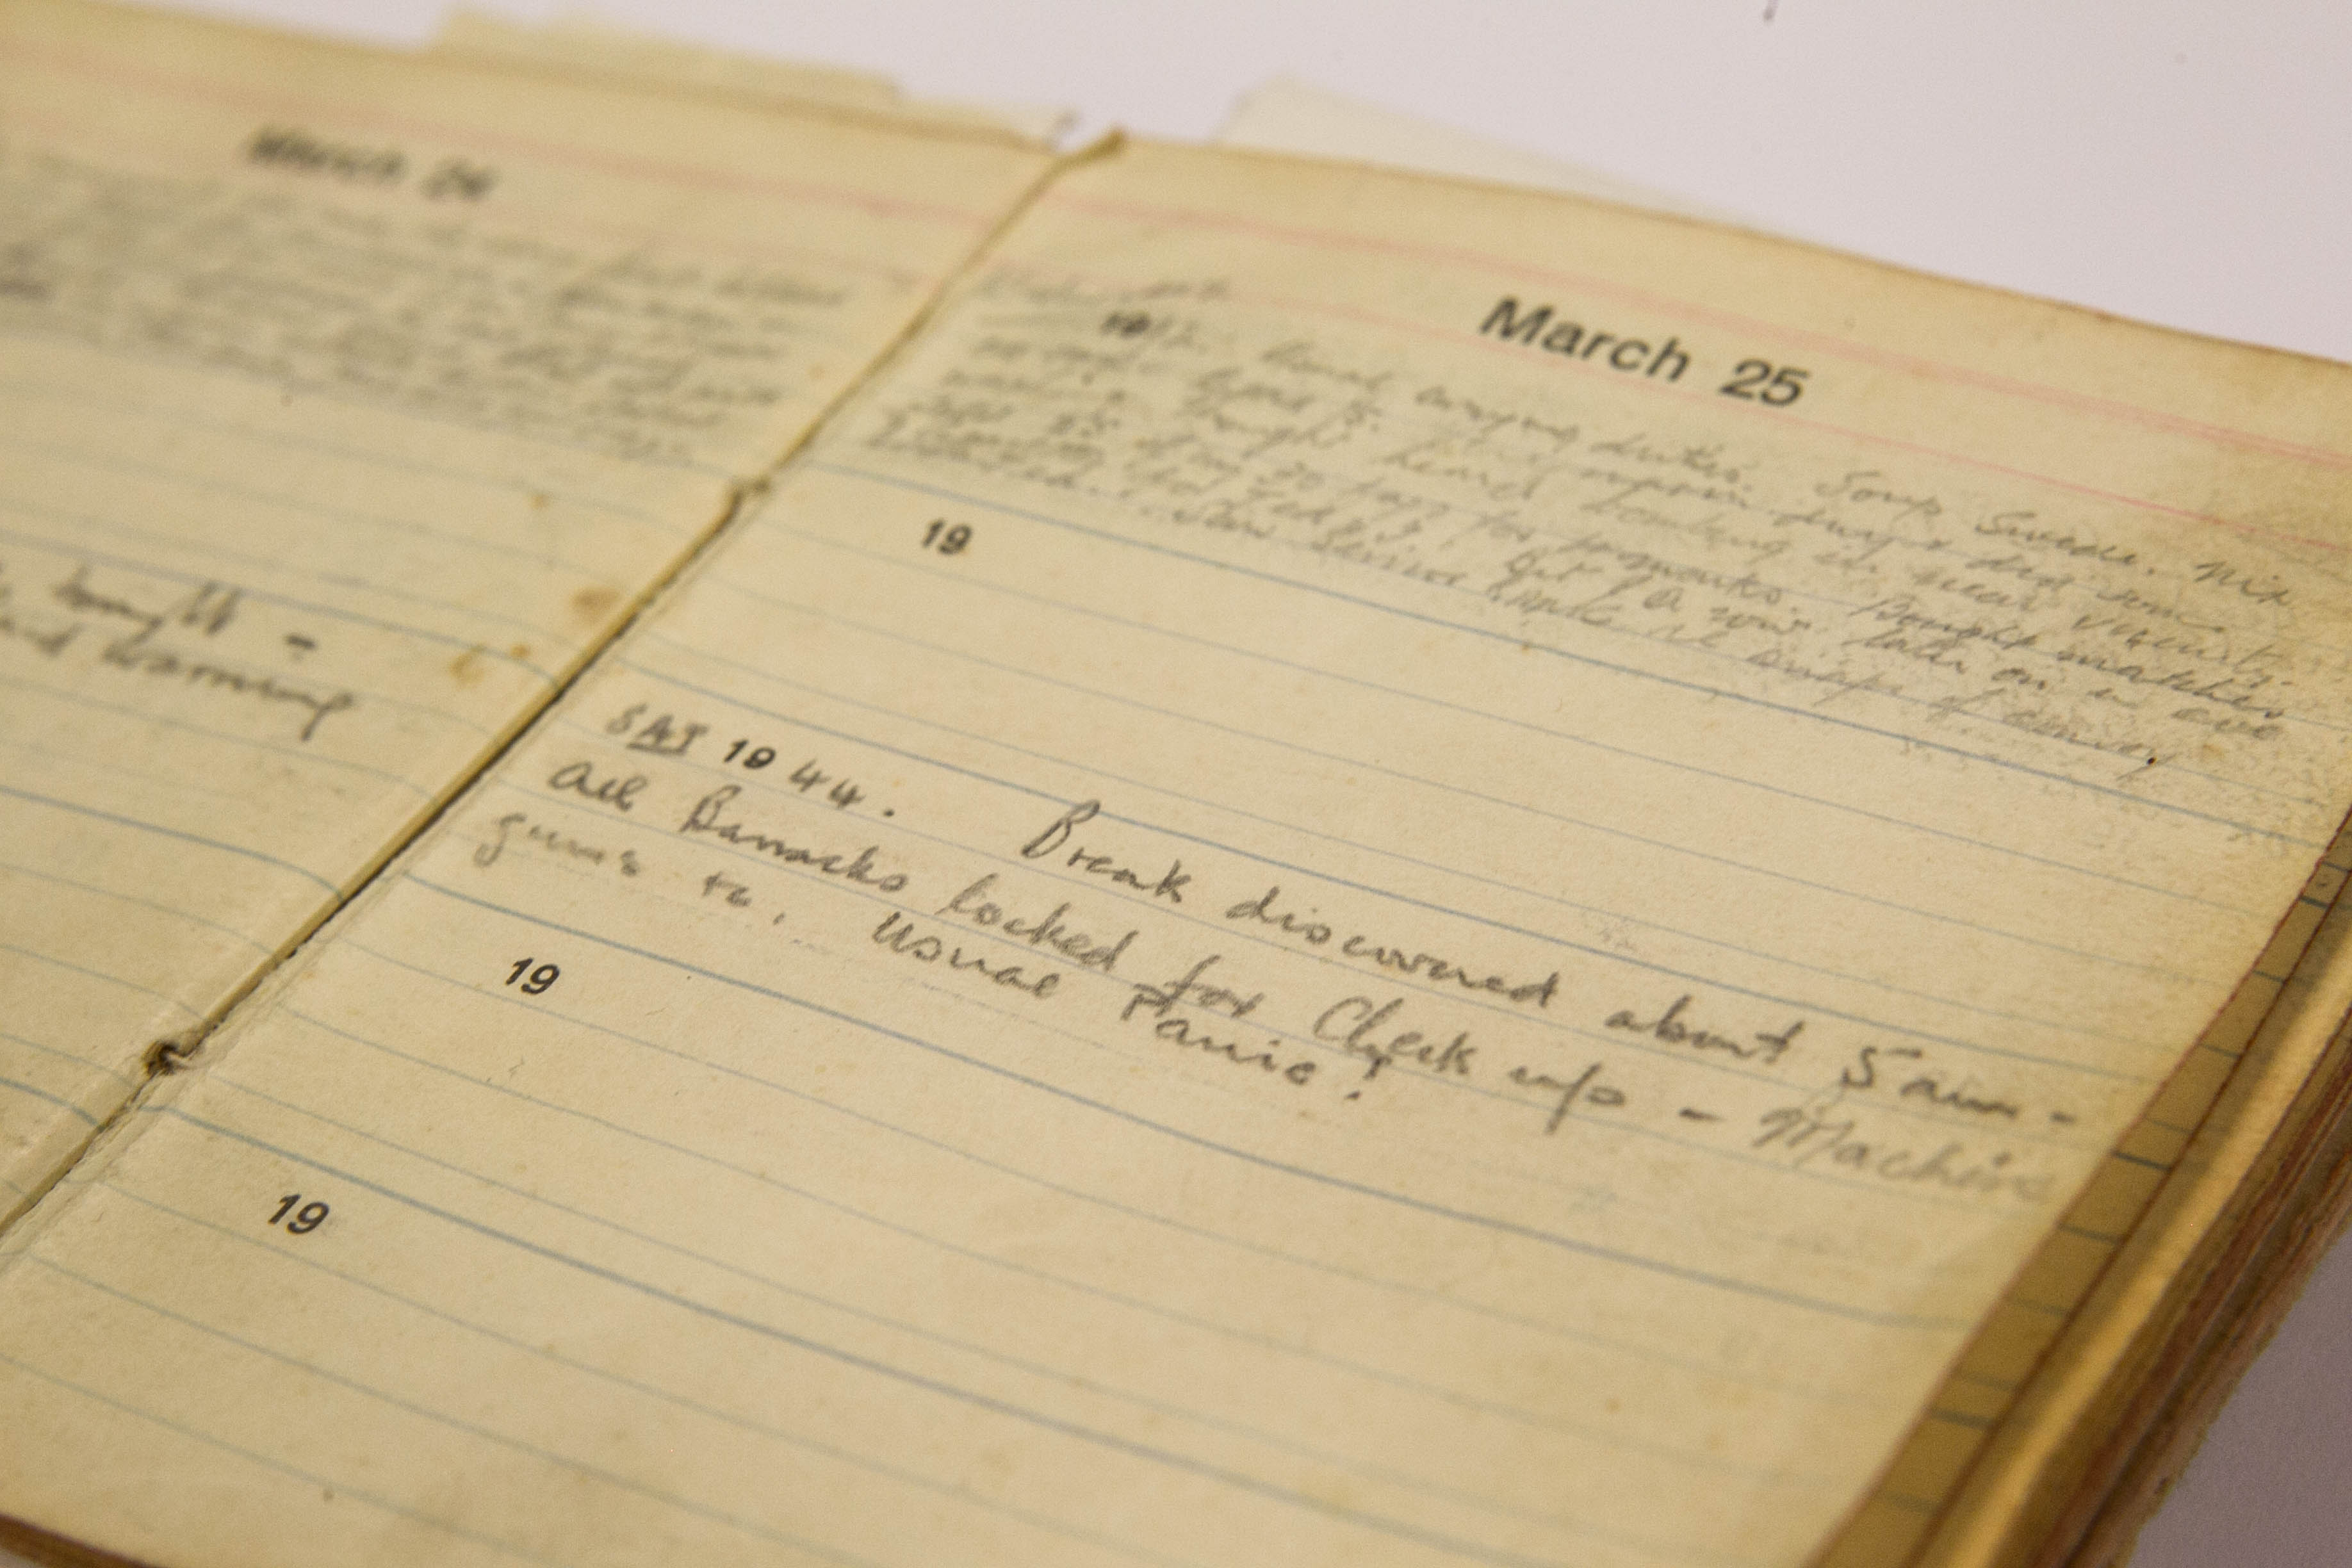 Alex Lee's war time diary from when he was held captive in Nazi Camp Stalag Luft III and witnessed, "The Great Escape.